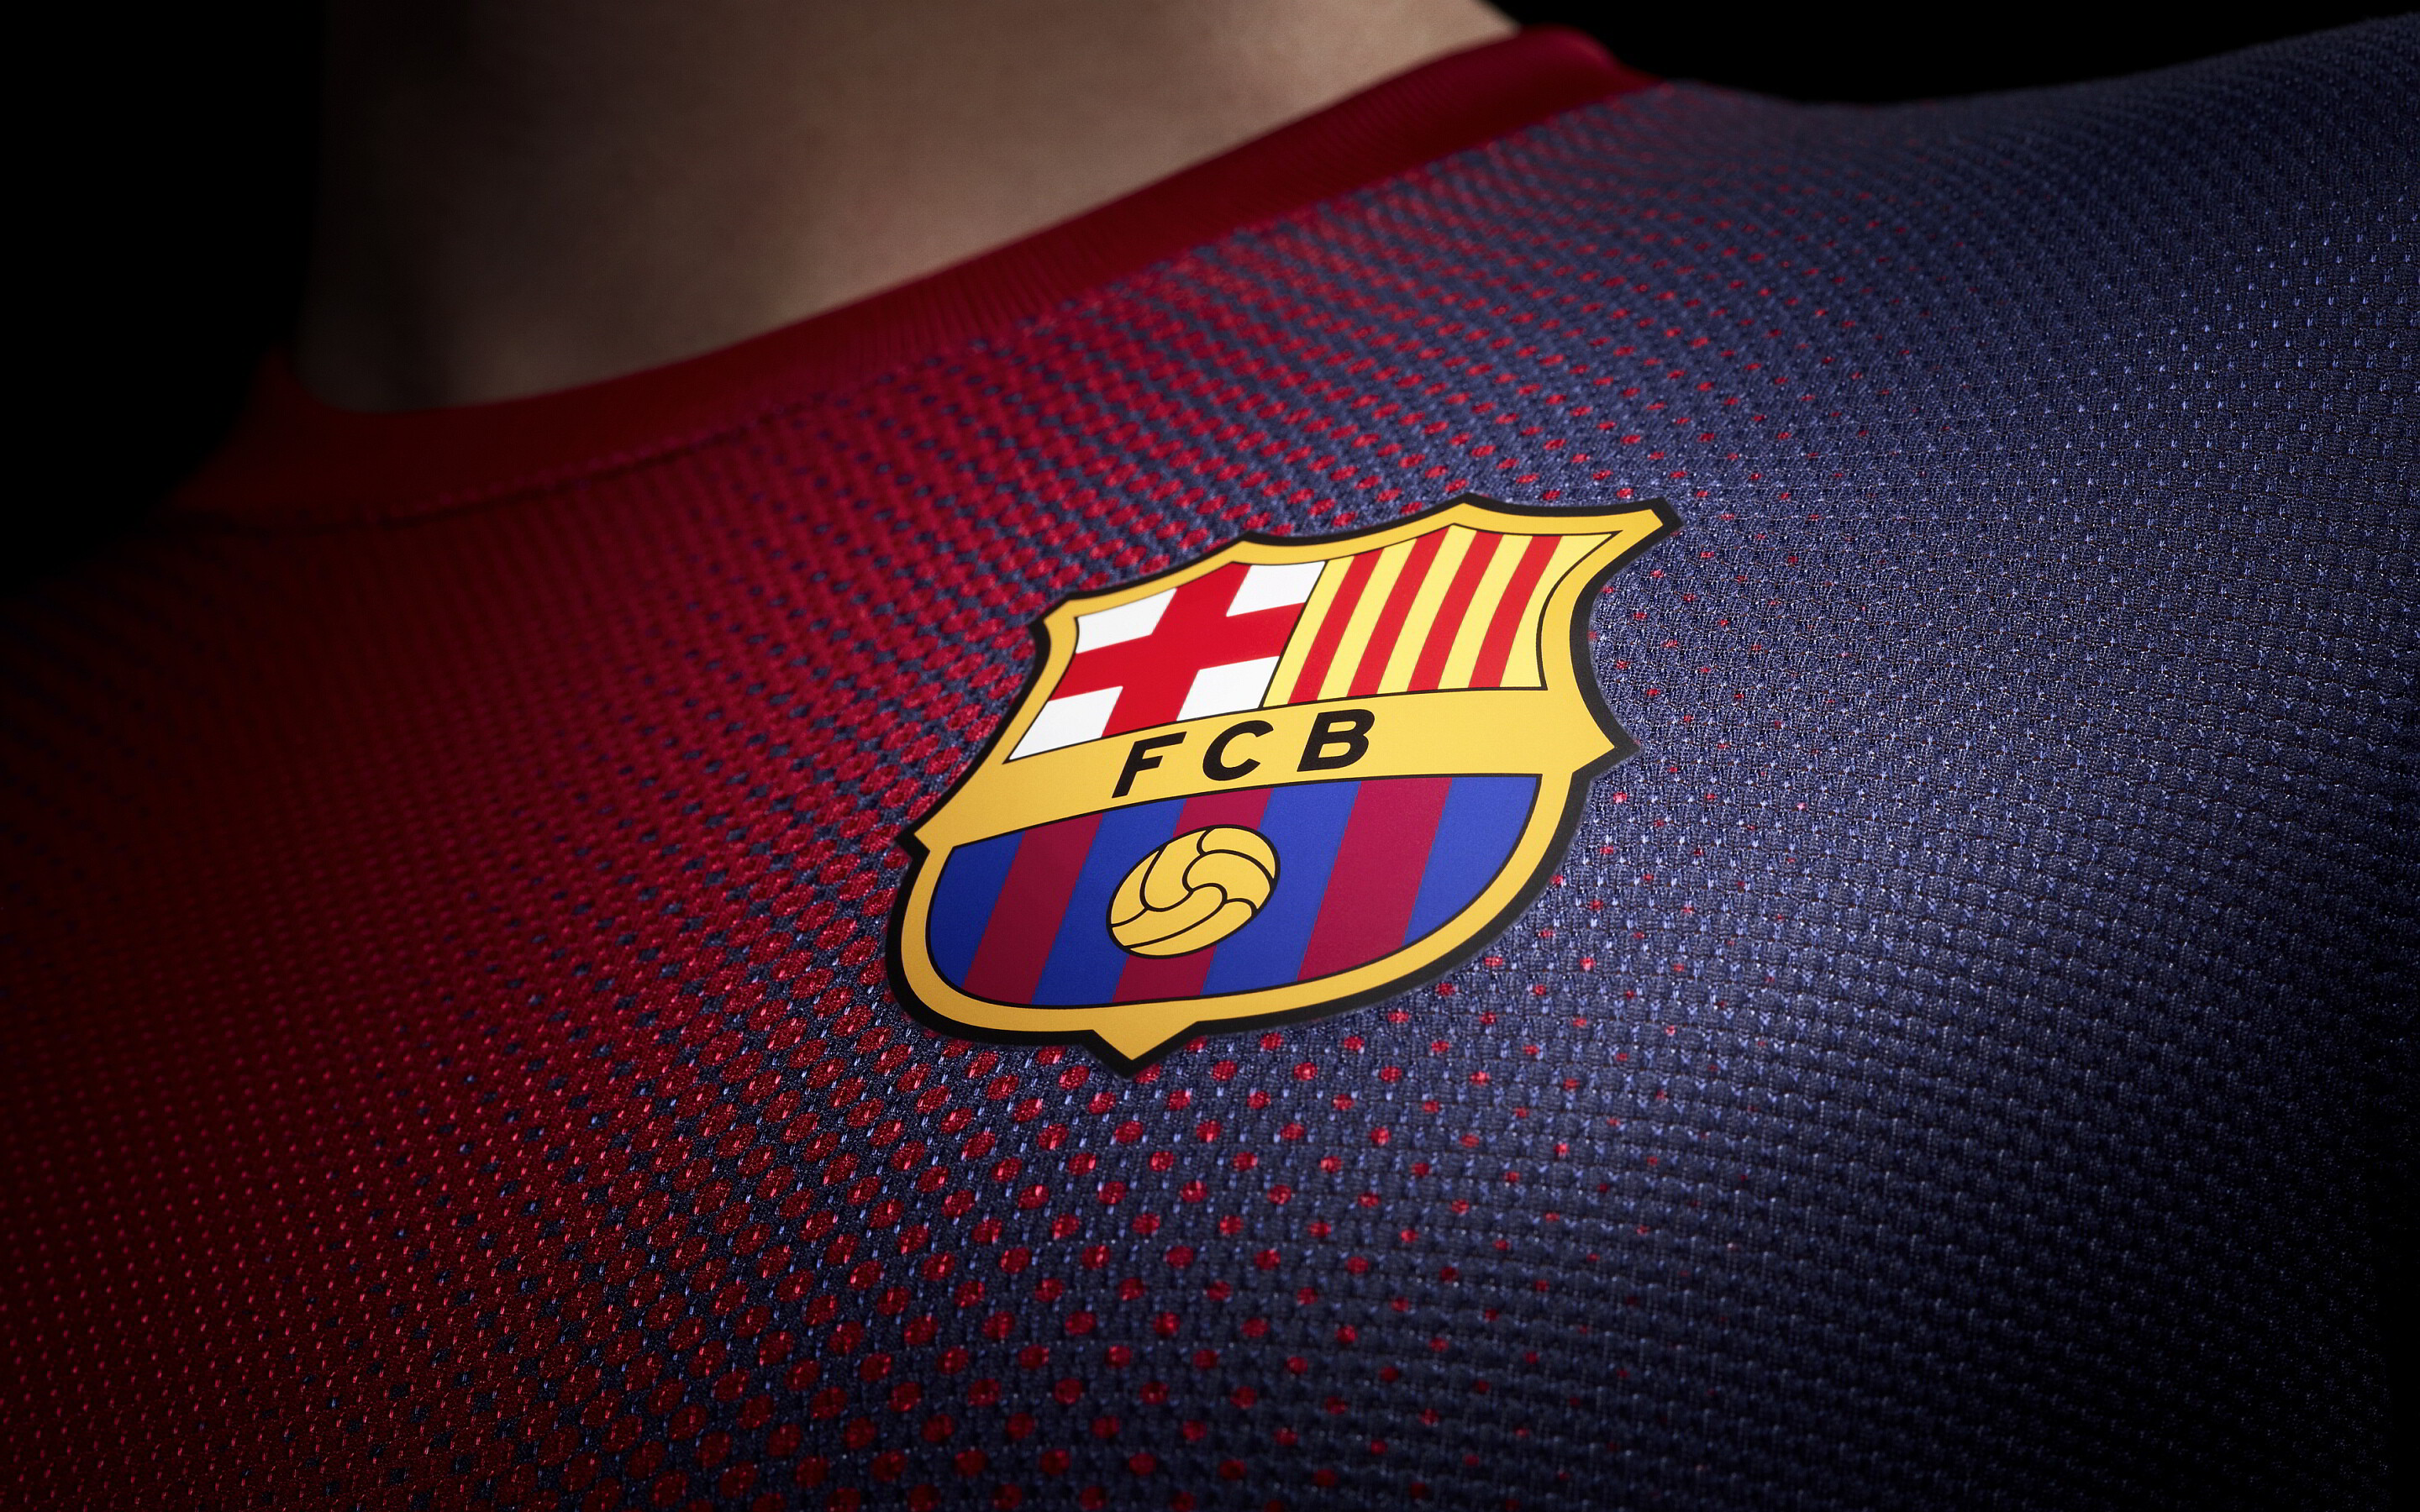 FC Barcelona: One of the richest and most popular clubs in the world, Emblem. 2880x1800 HD Wallpaper.